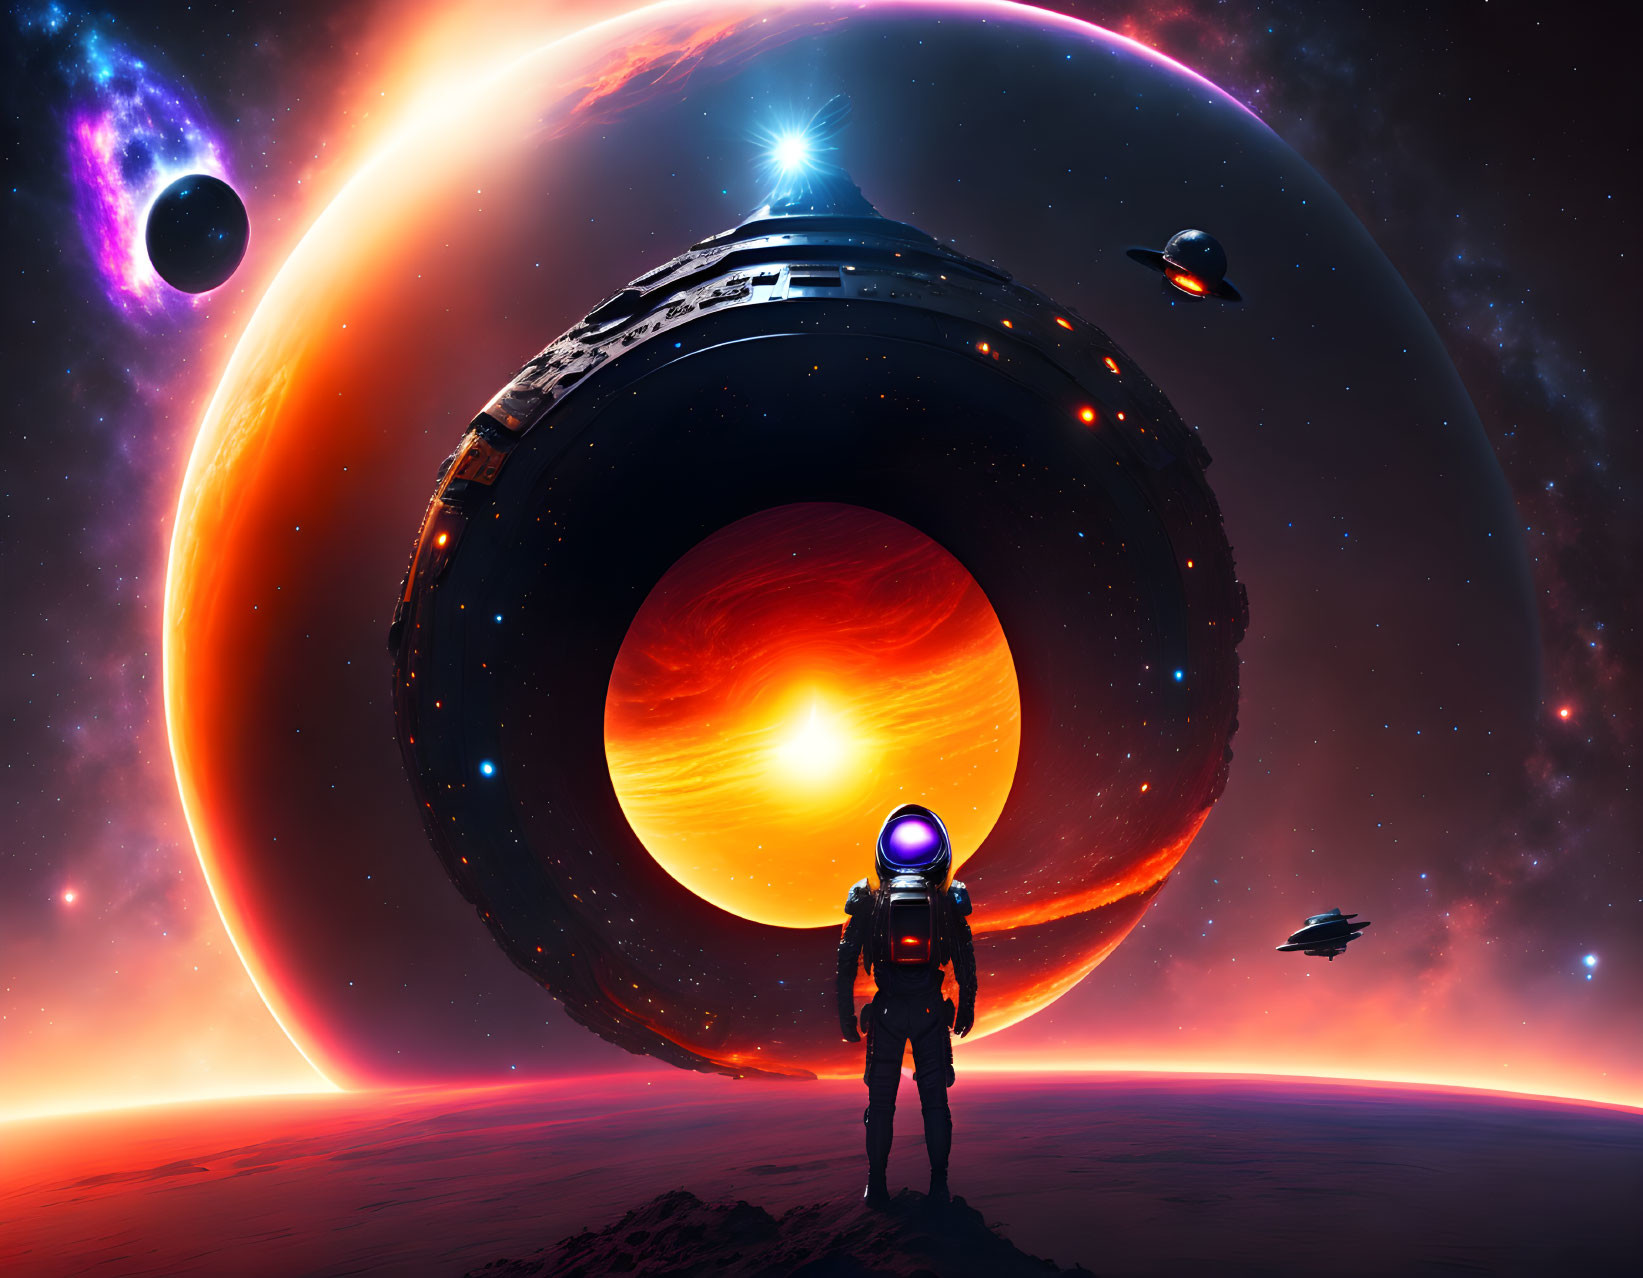 Astronaut on alien surface with vibrant planets and massive ringed structure.